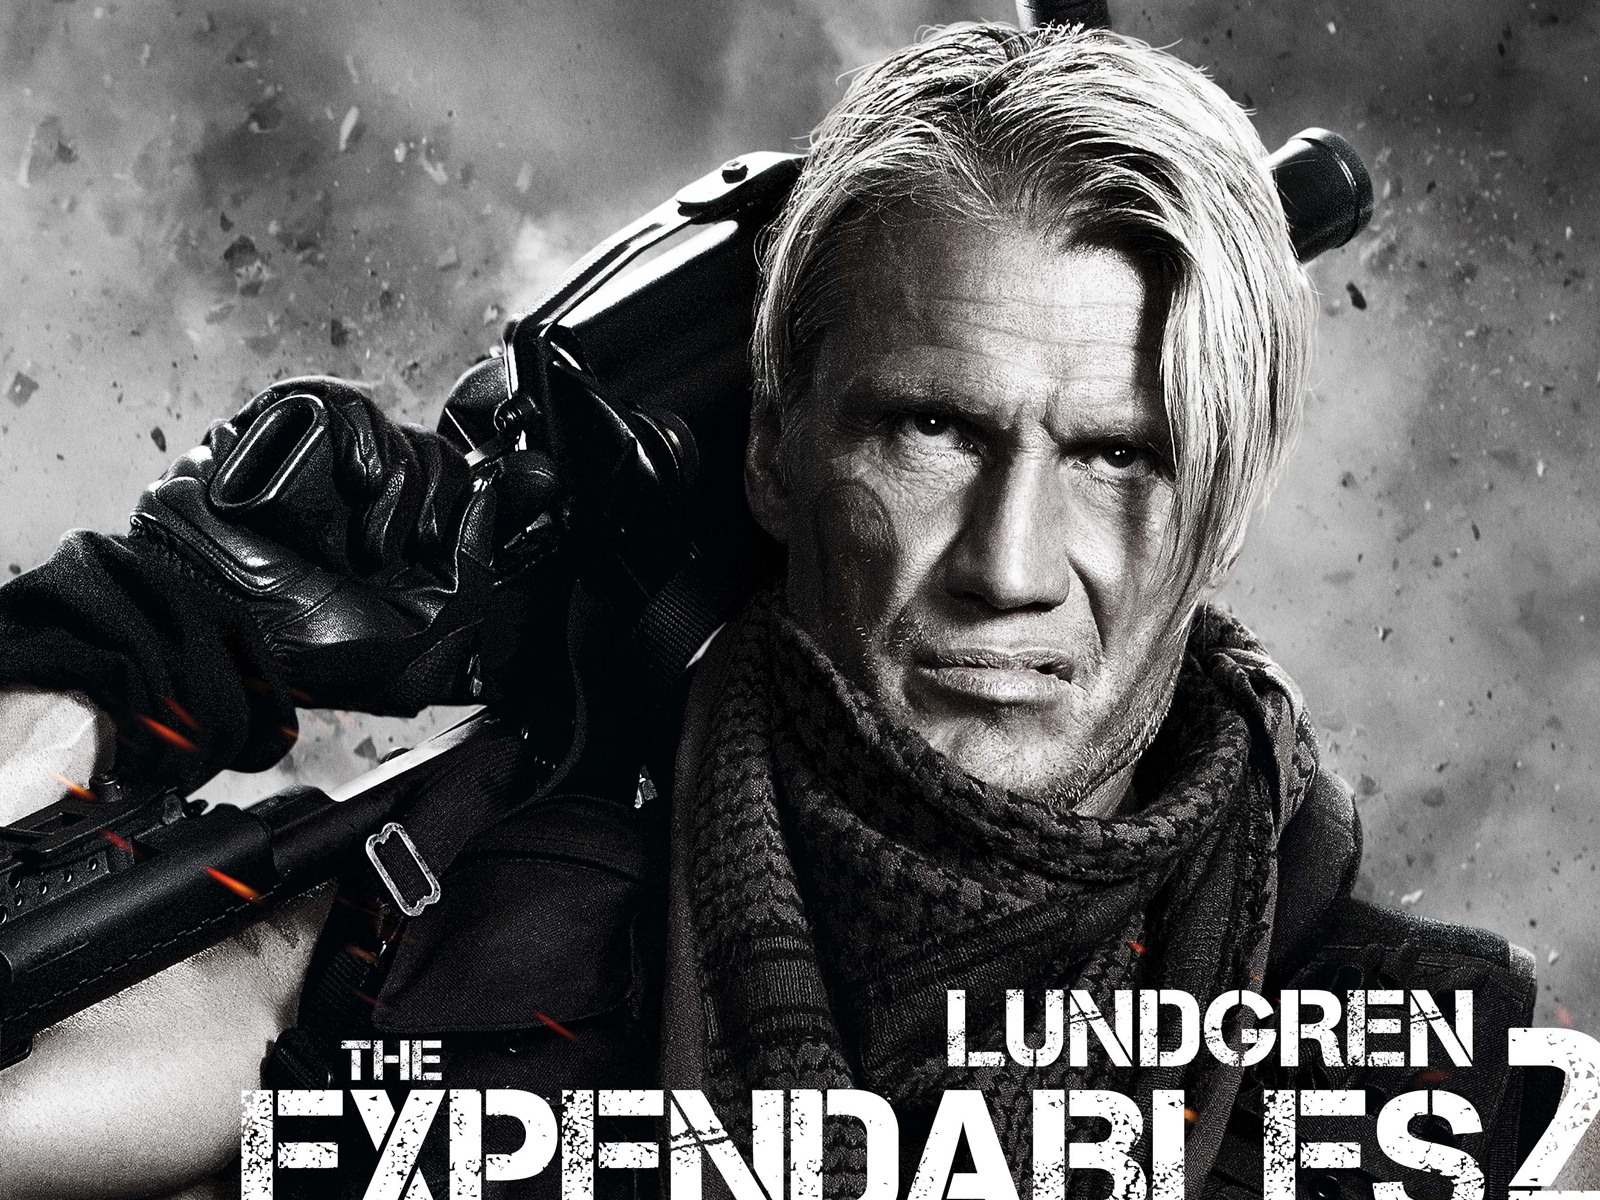 2012 The Expendables 2 HD wallpapers #3 - 1600x1200